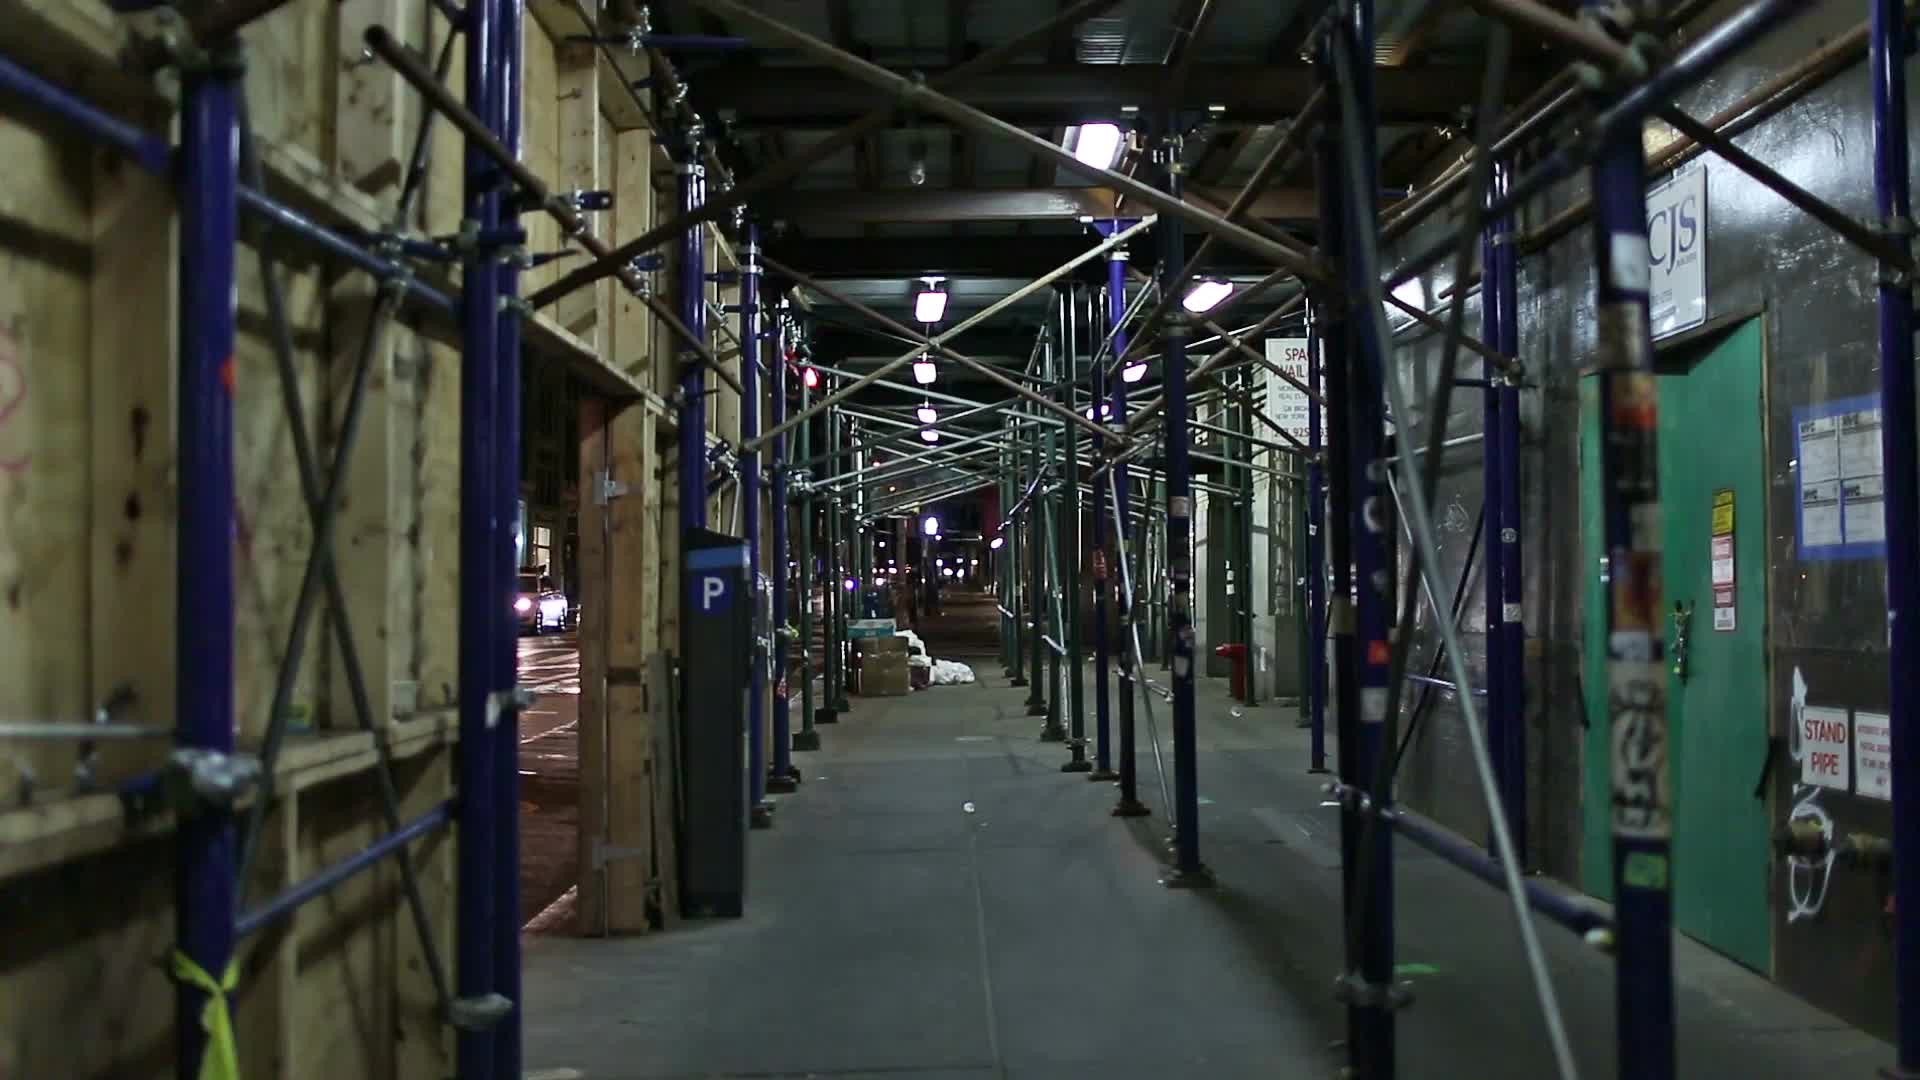 passageway under scaffolding bars on noisy night with ambient noise of street in NYC